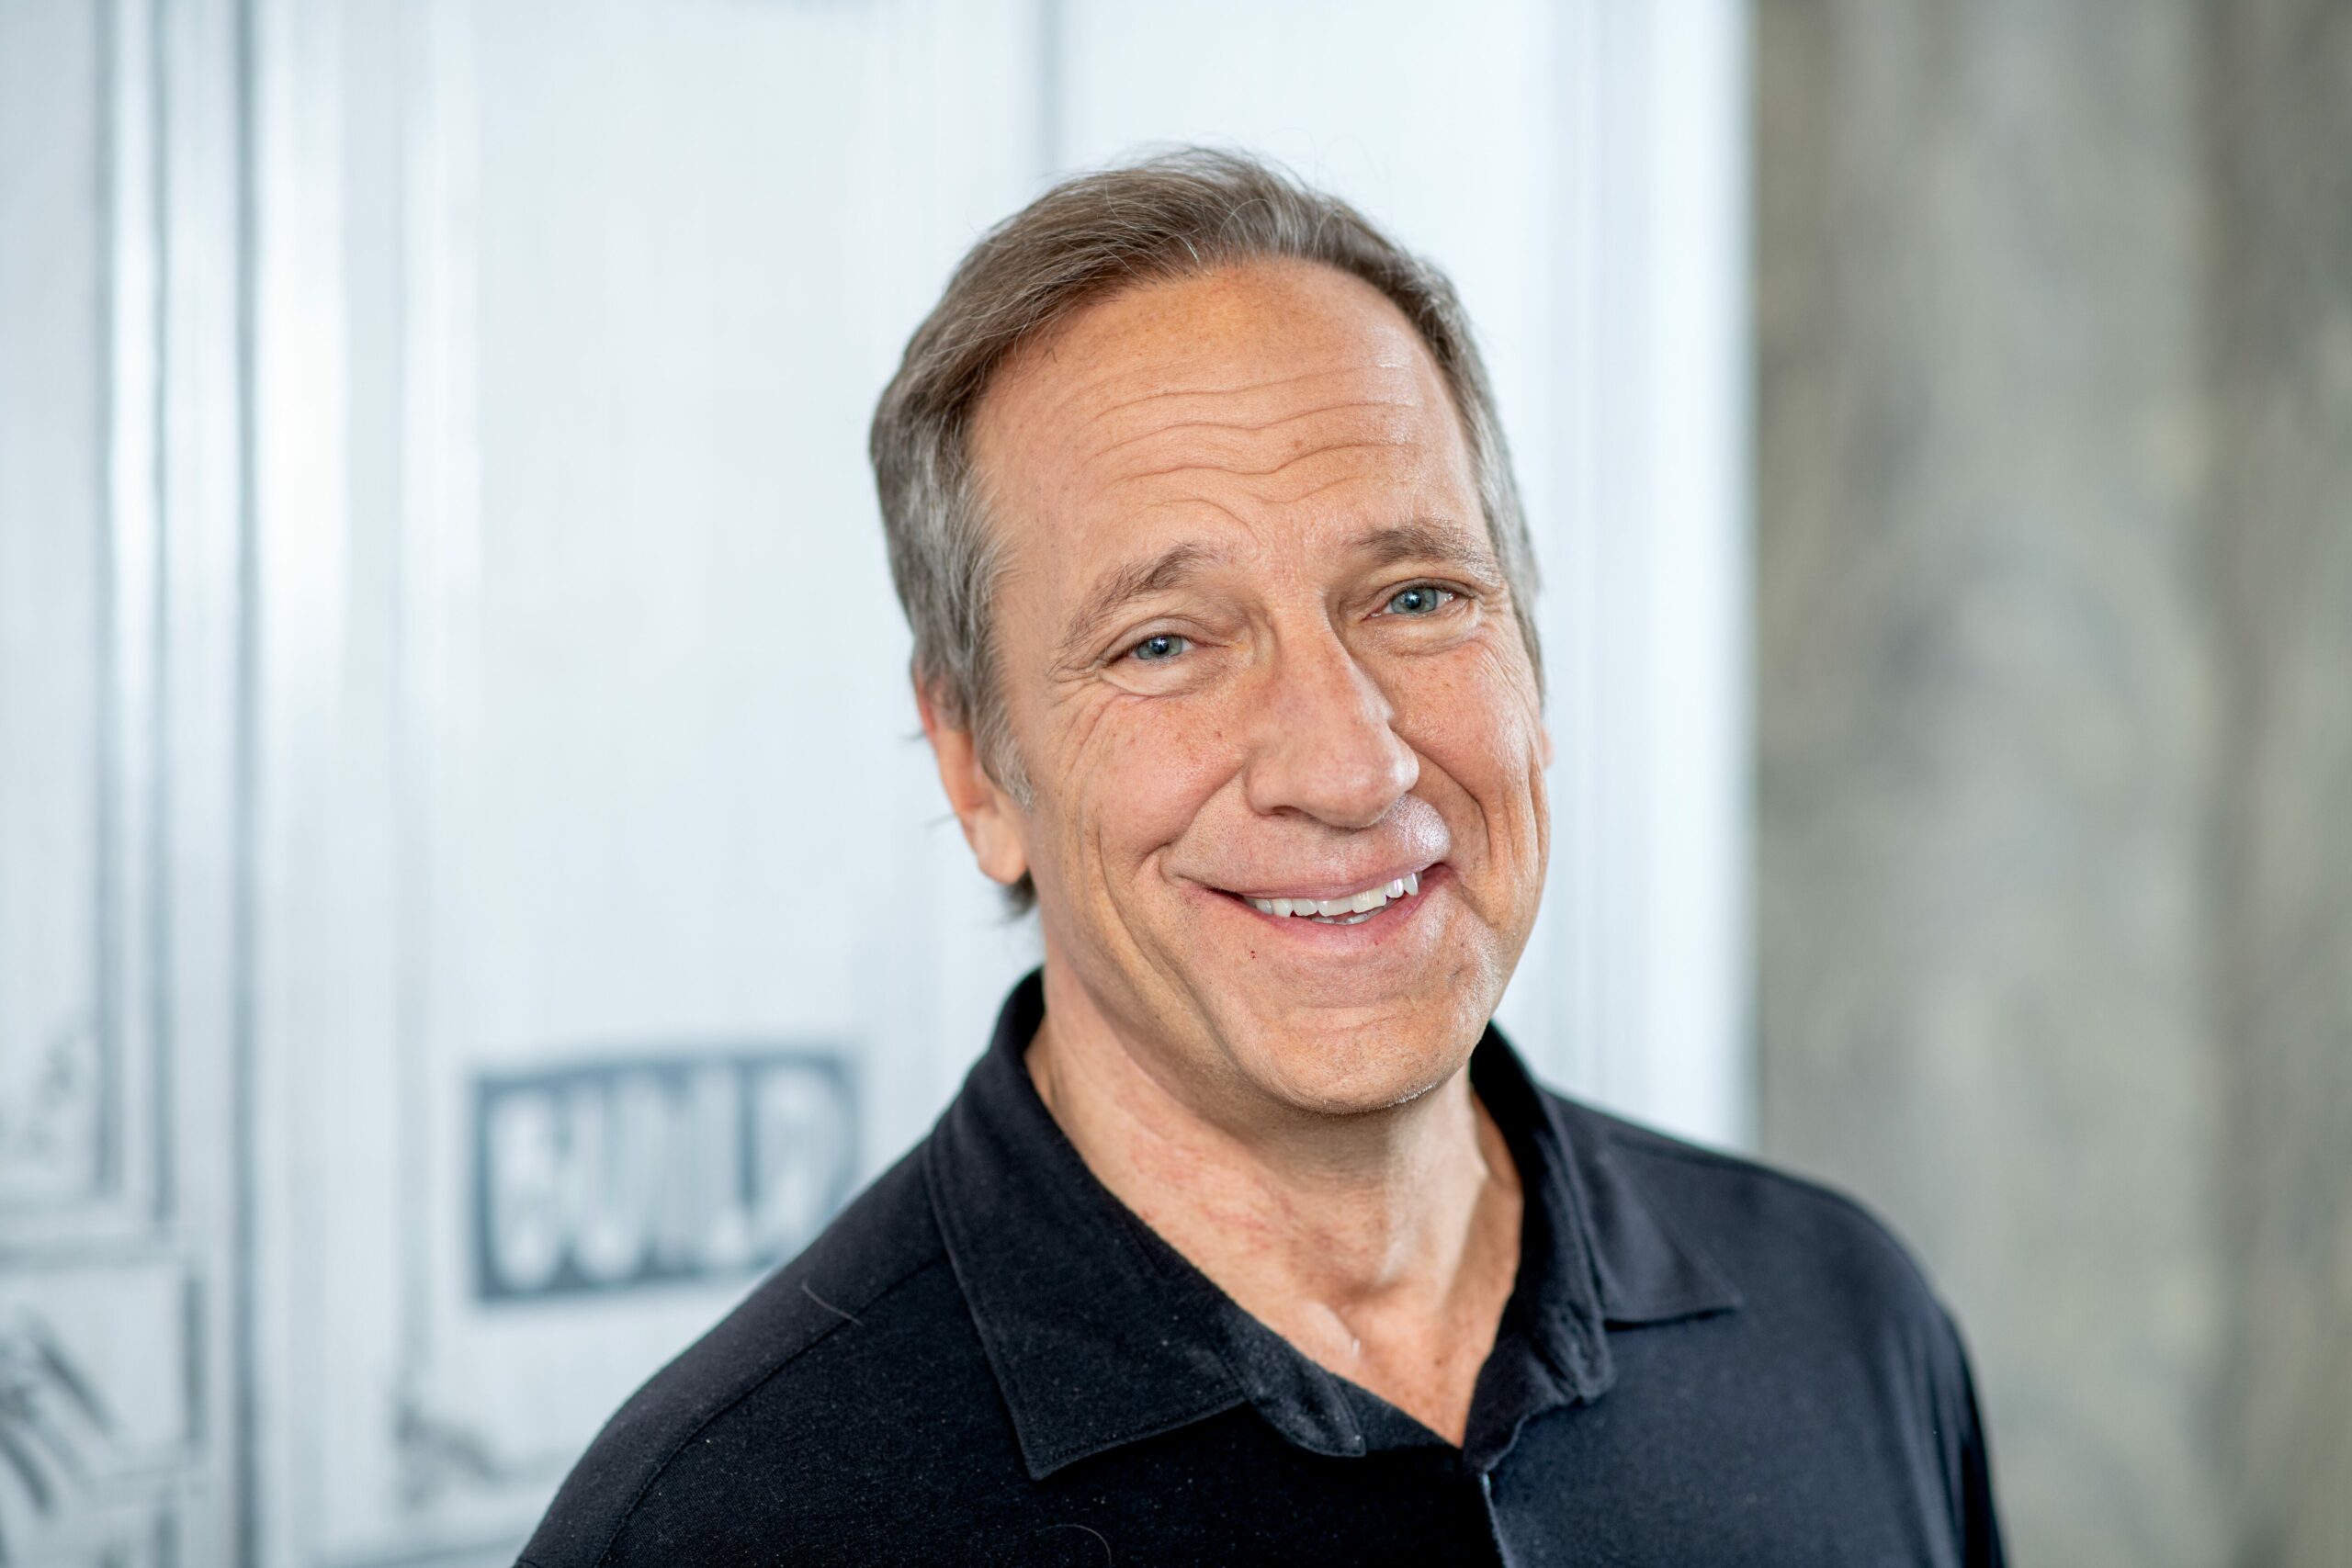 Where is Mike Rowe today?